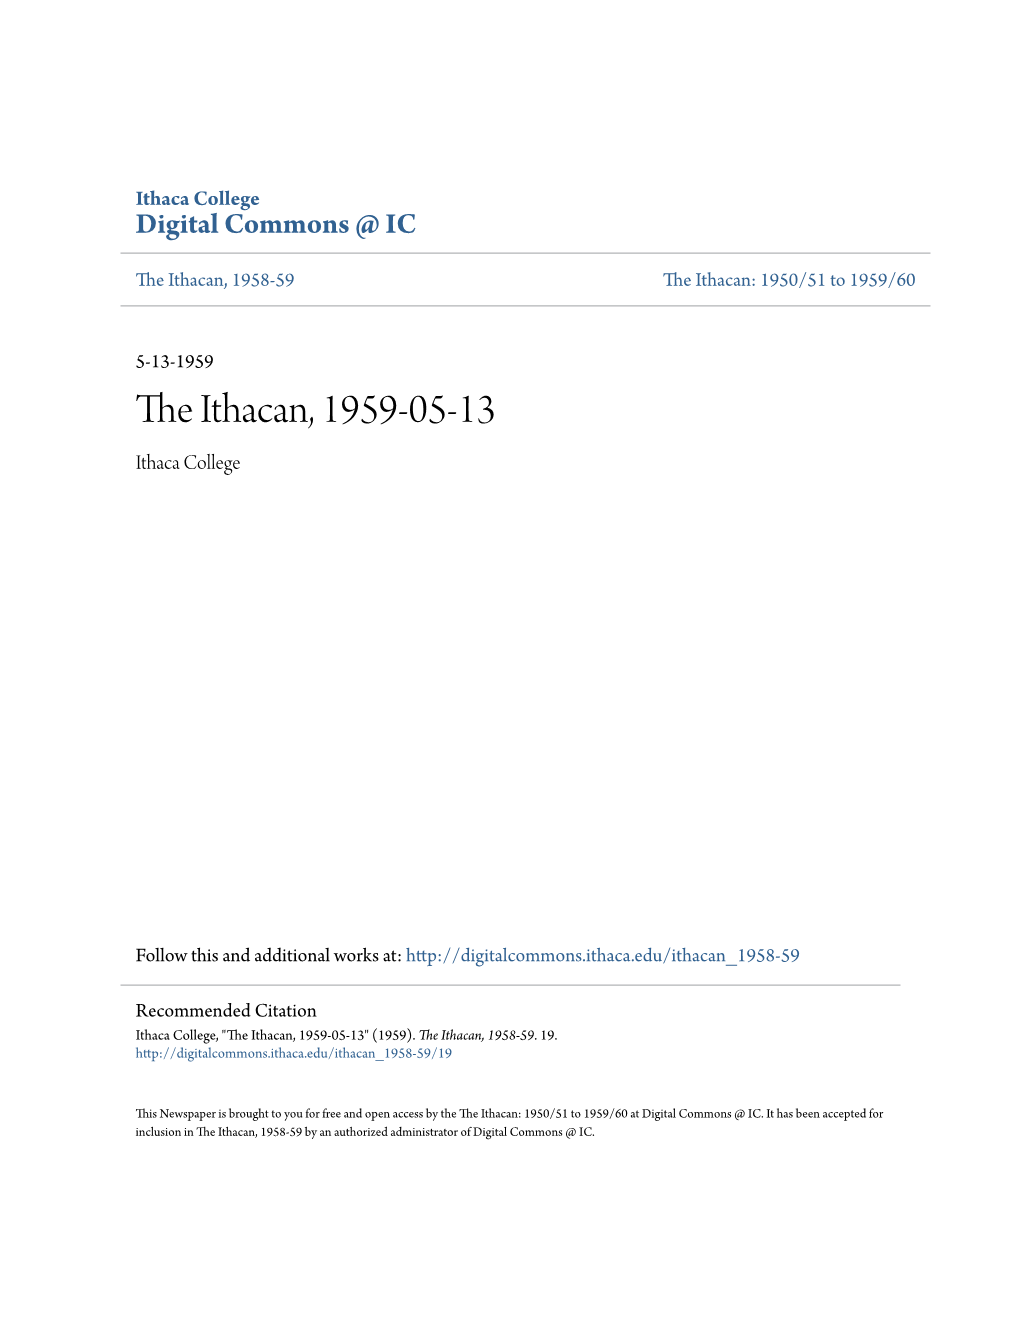 The Ithacan, 1959-05-13